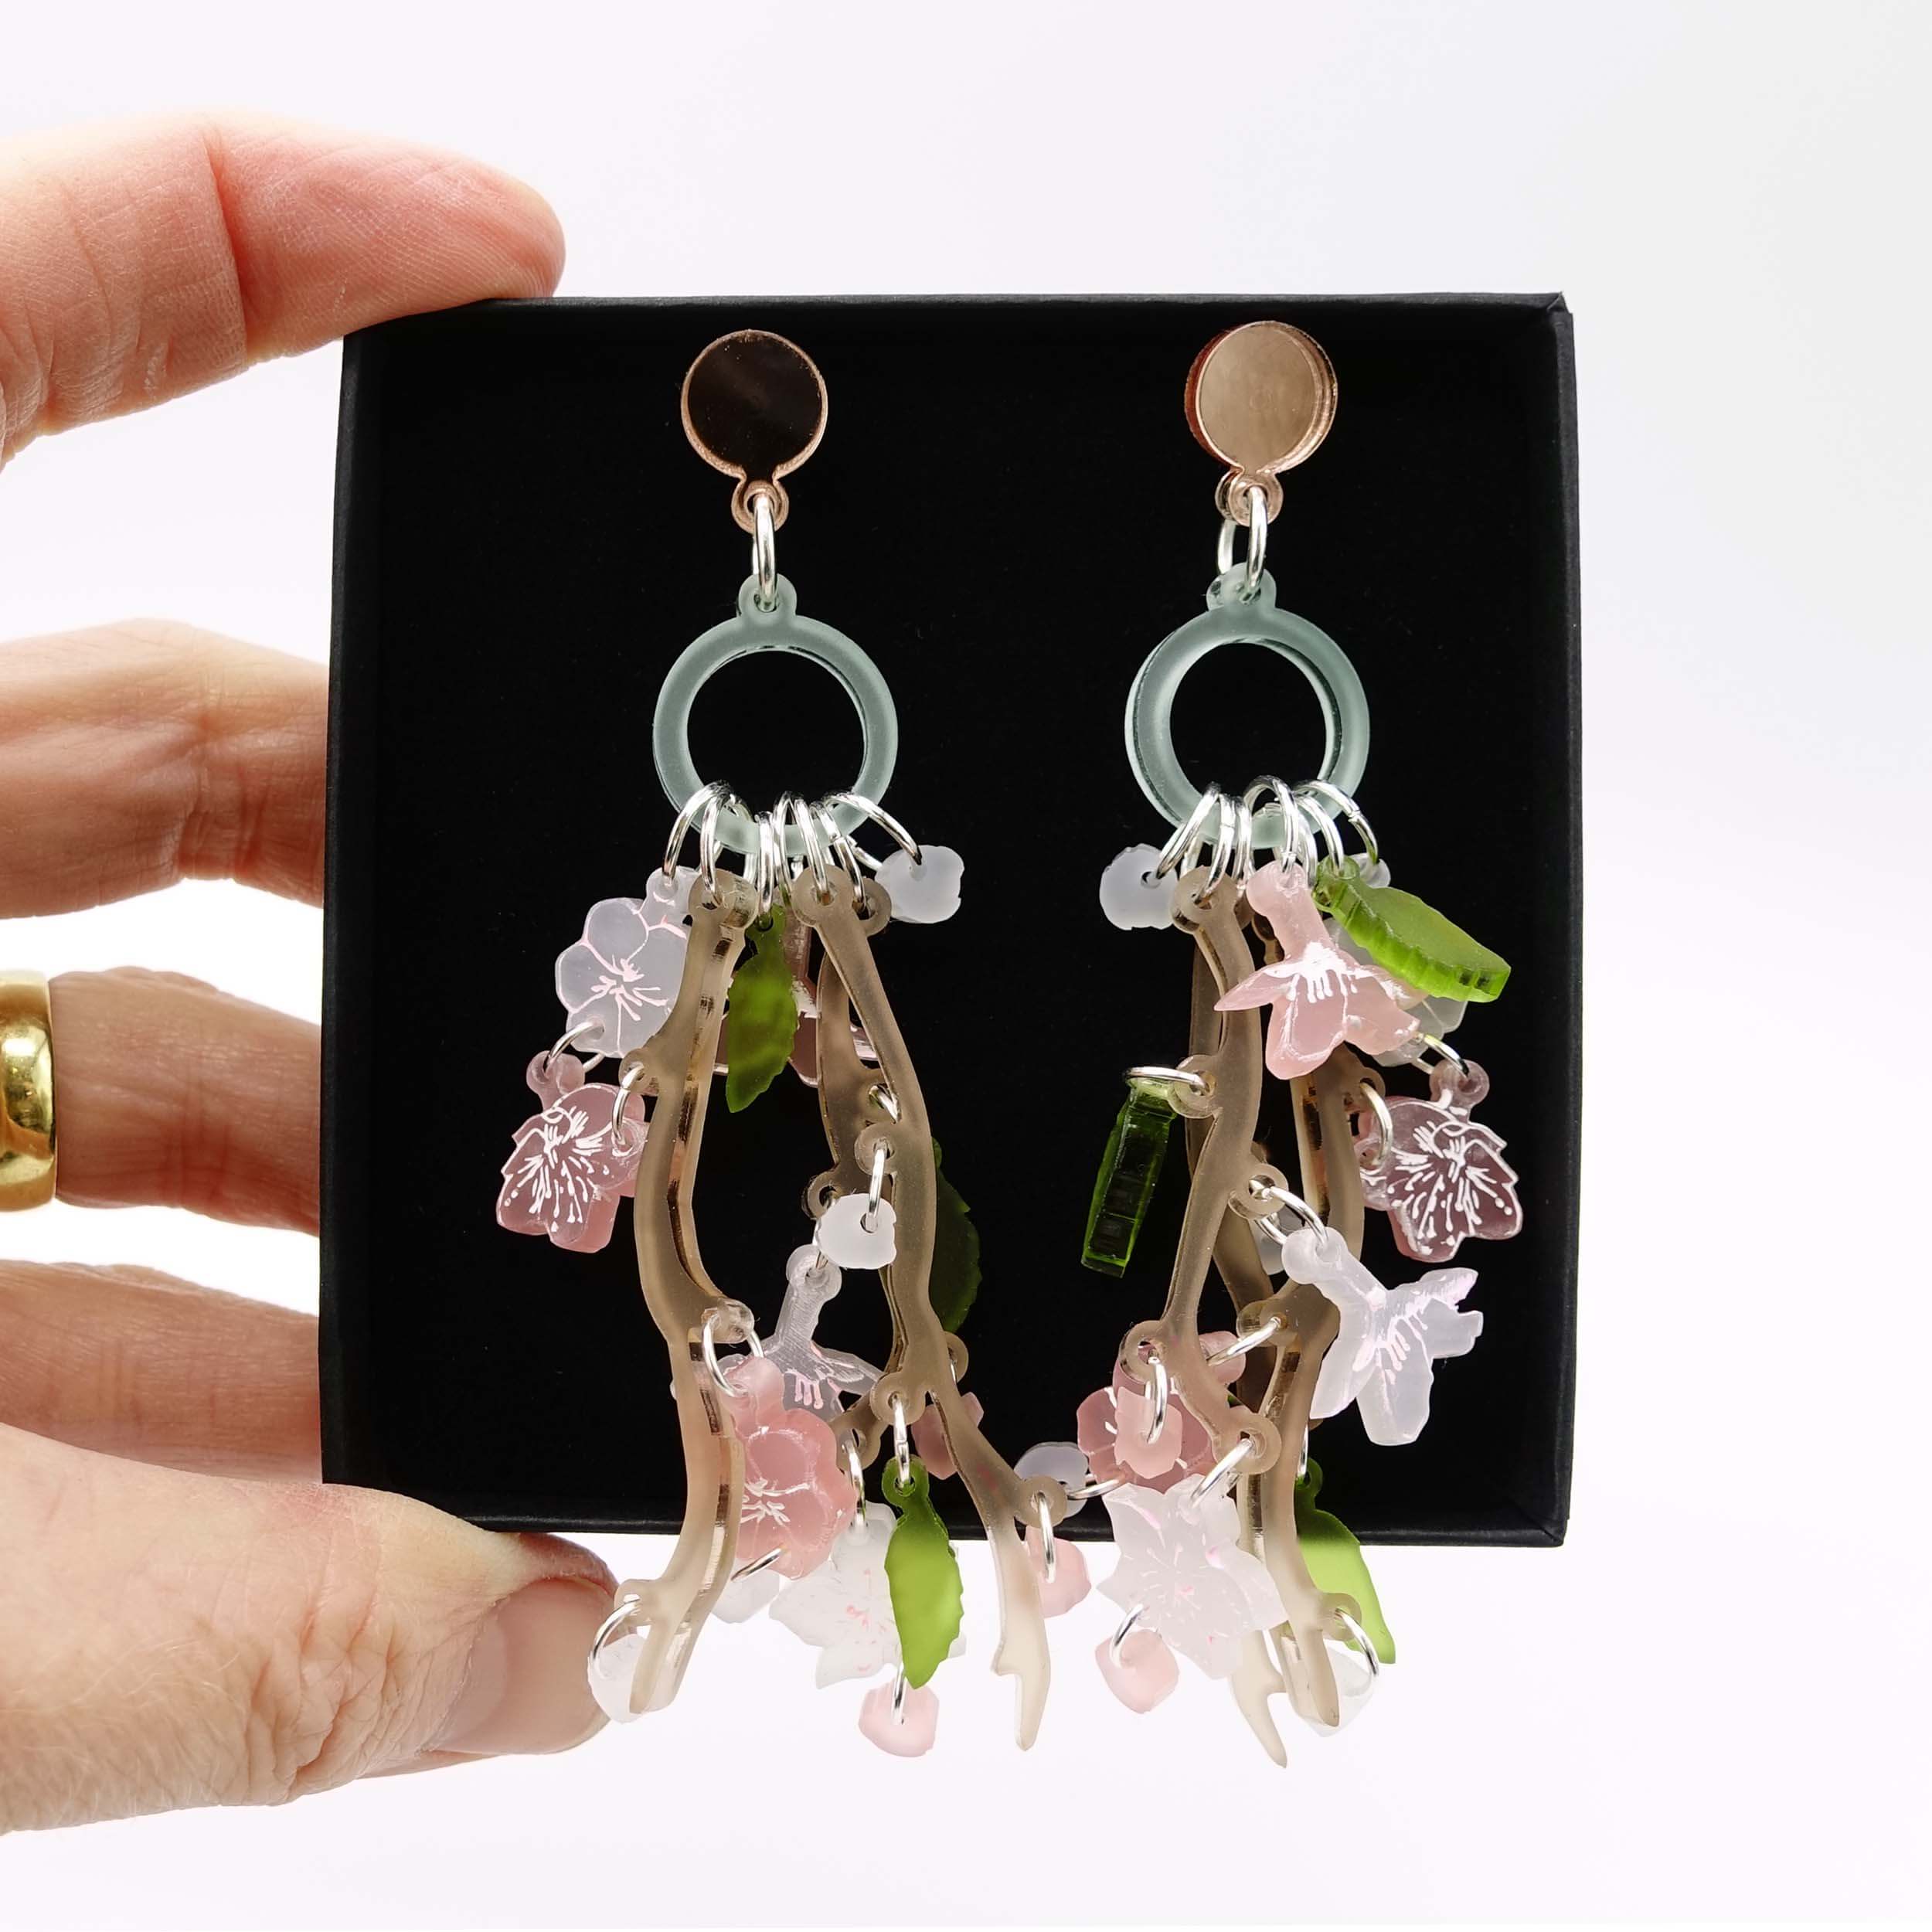 Limited Edition Cherry Blossom statement earrings by Wear and Resist. 